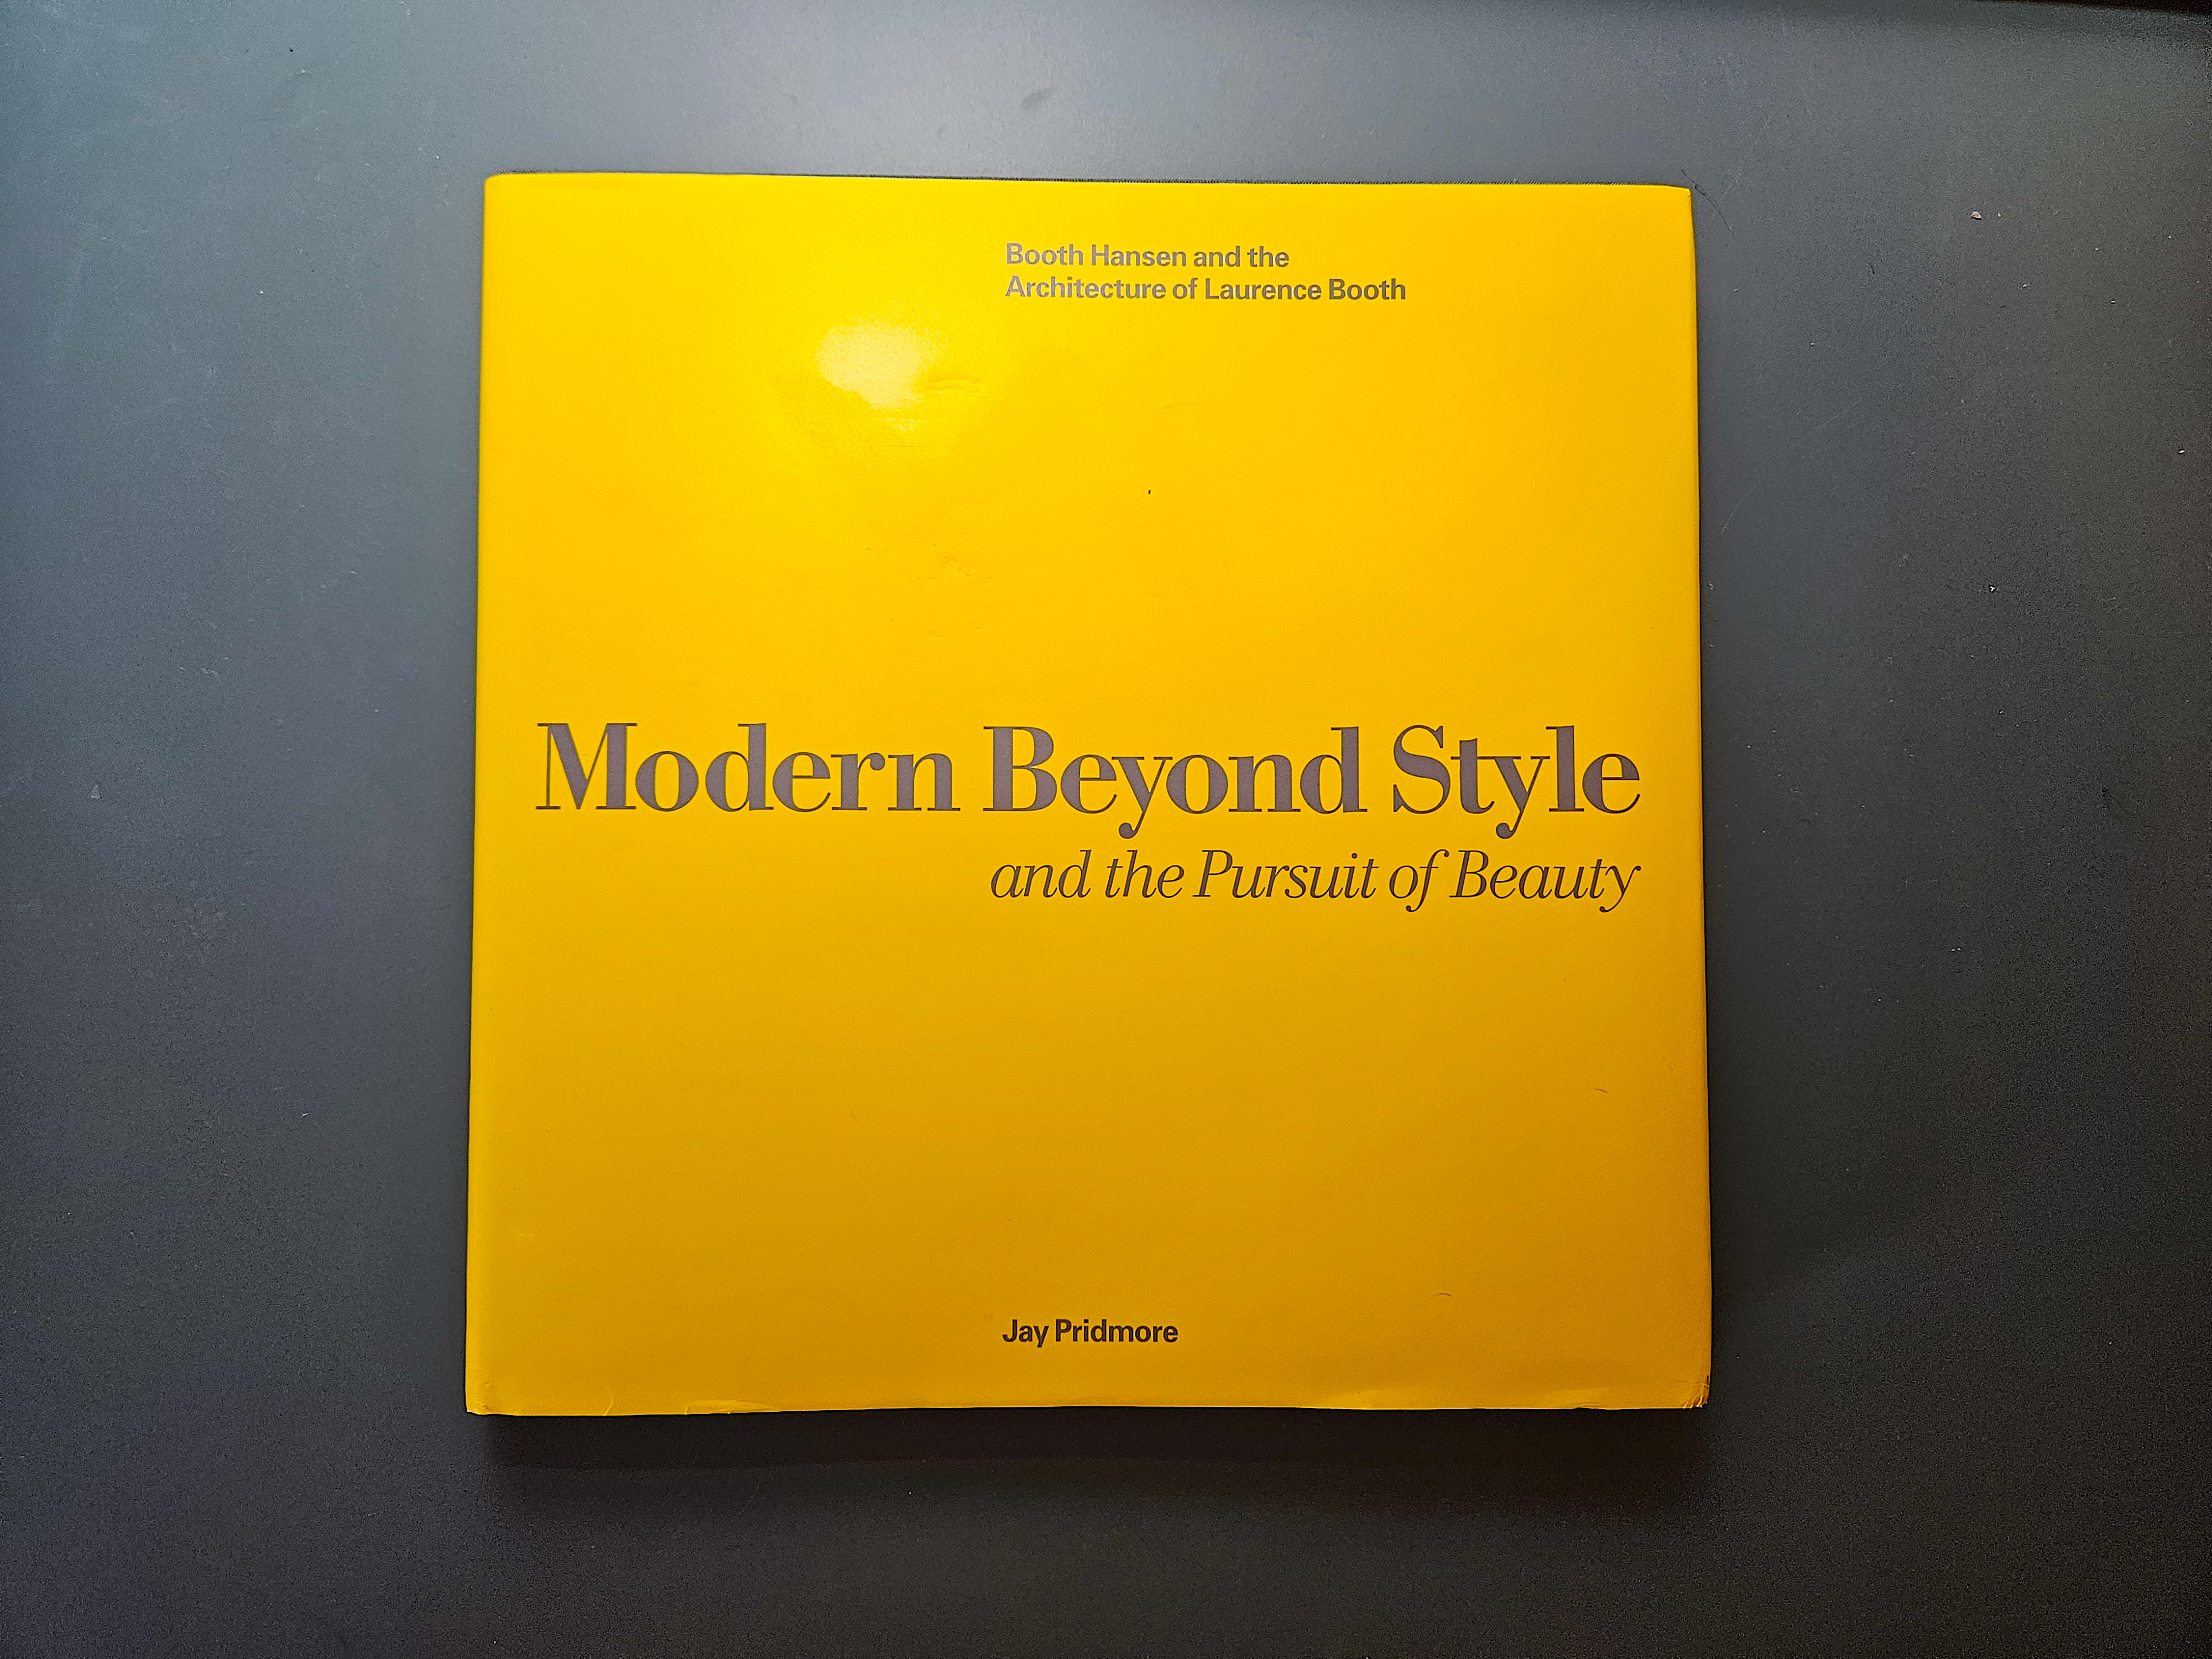 Modern beyond style, a book about architect Laurence Booth